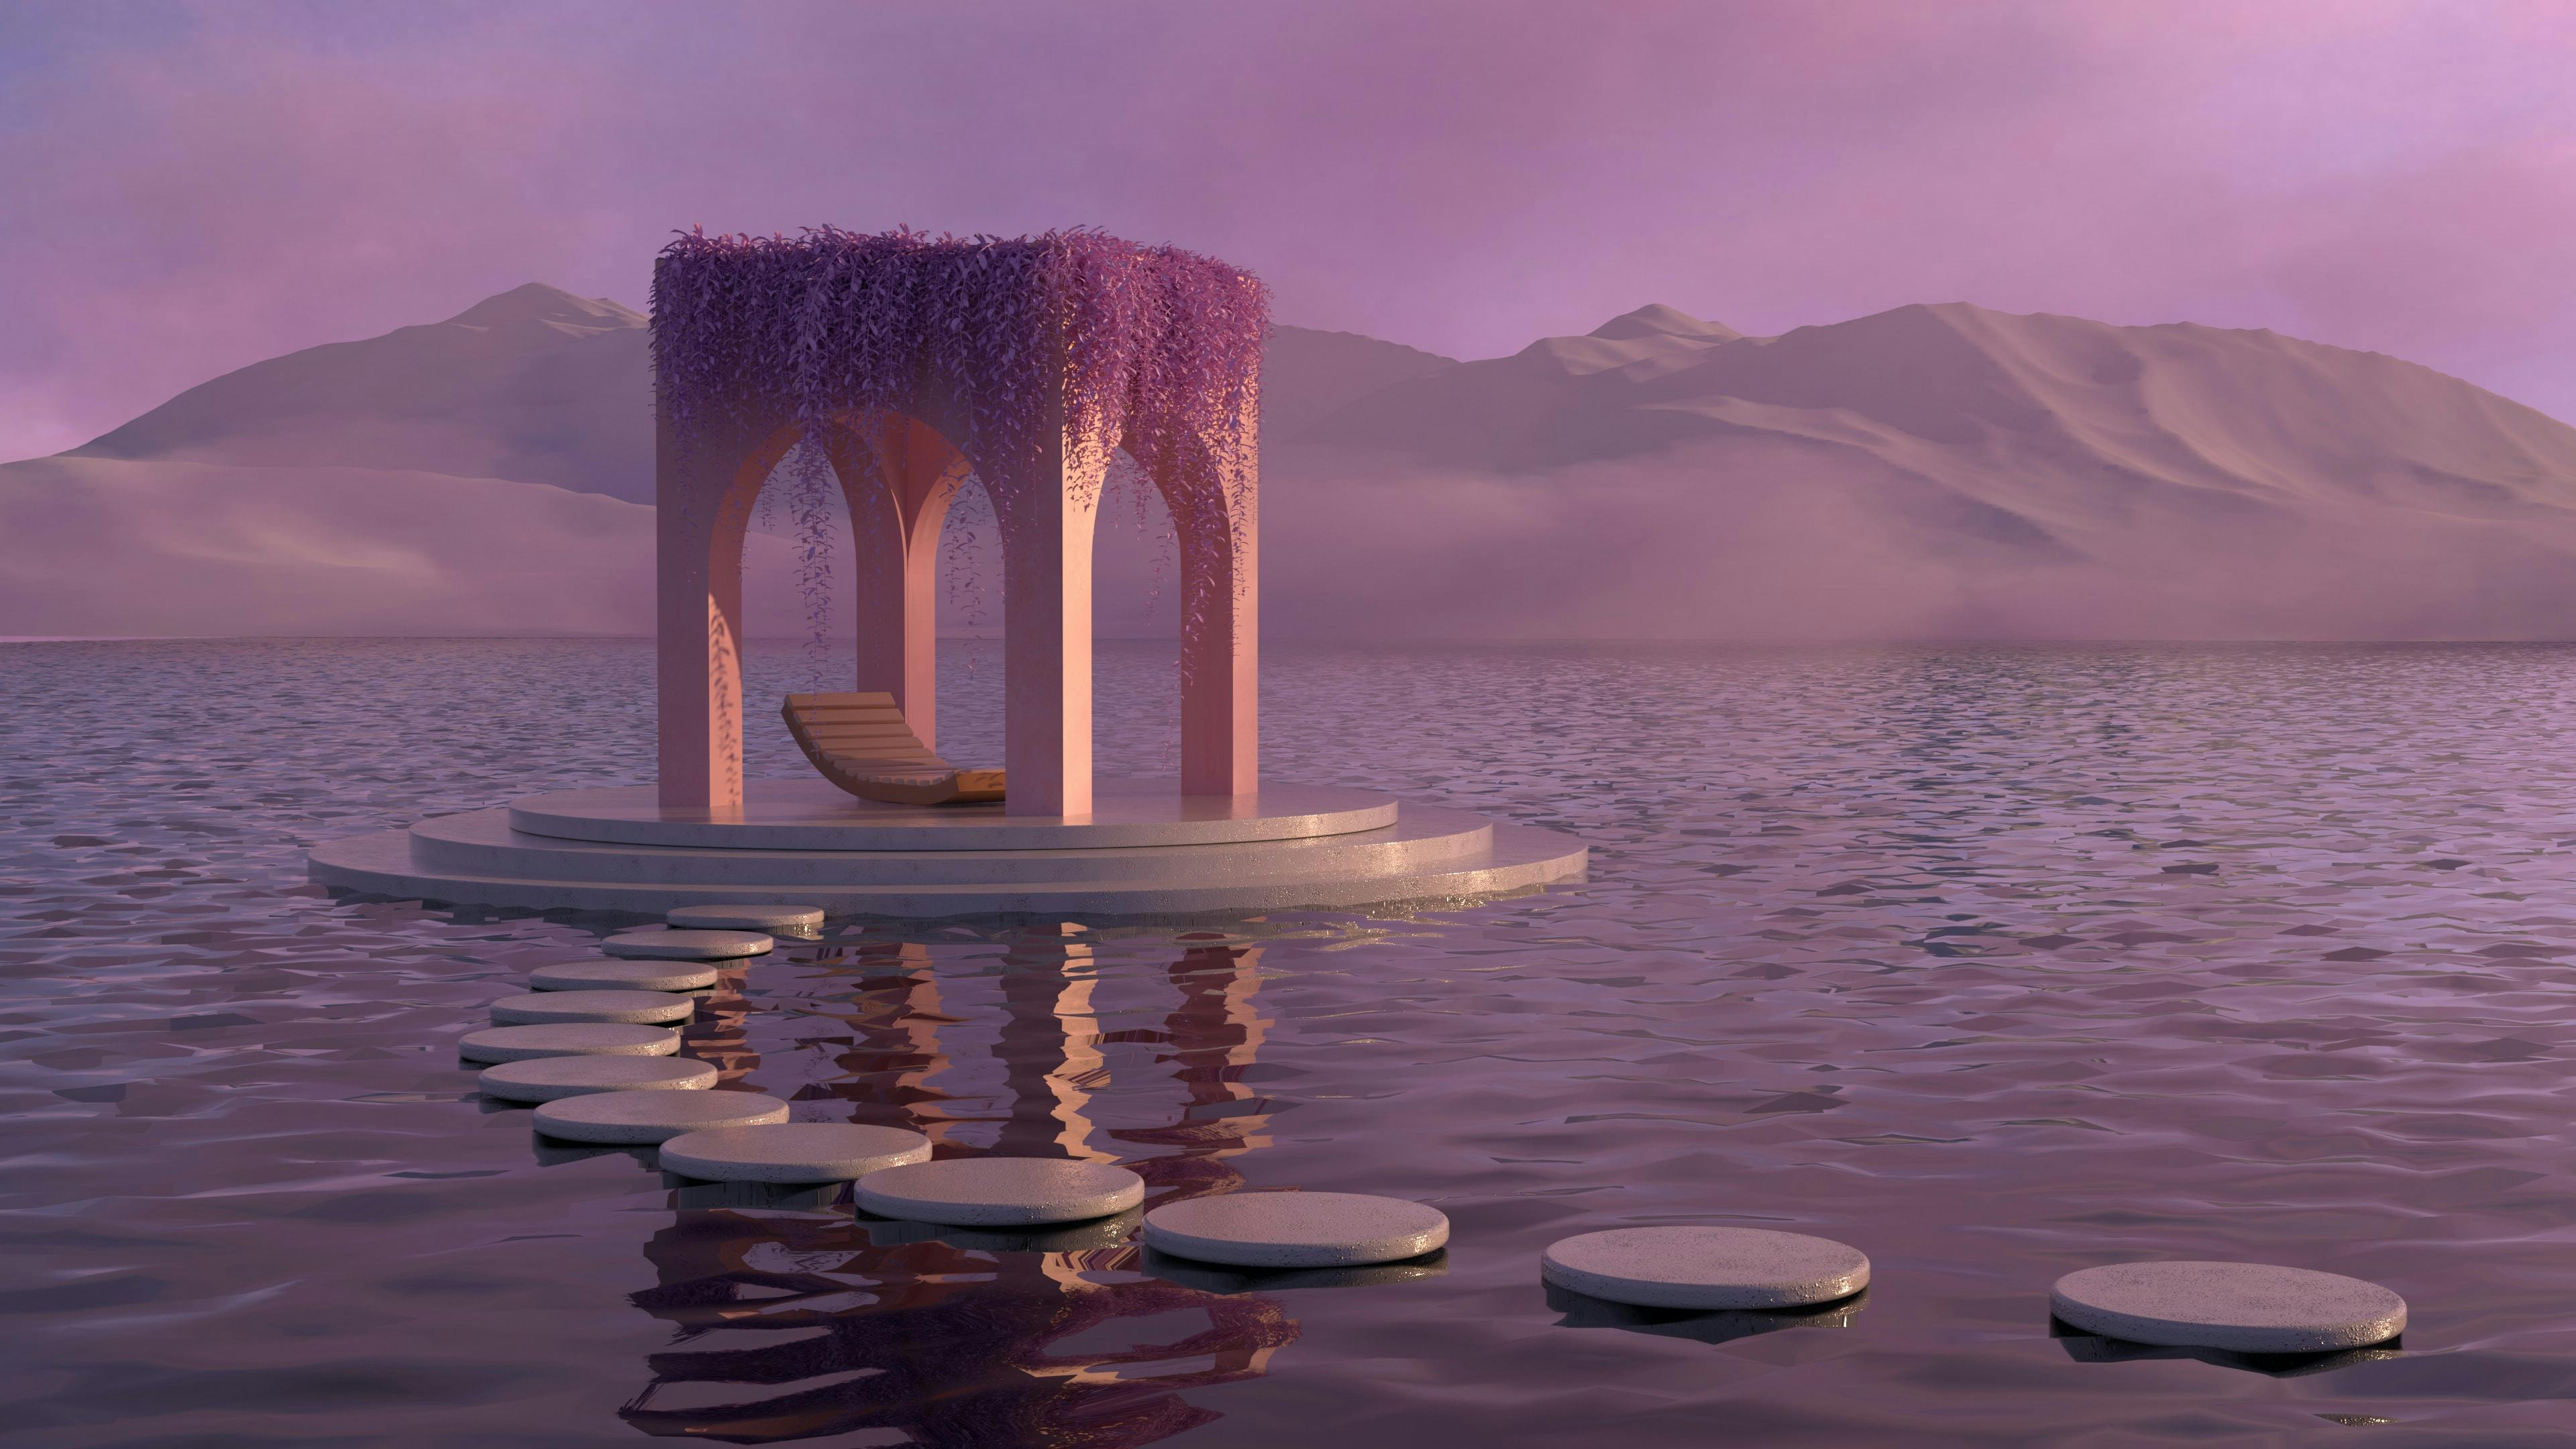 A lake with platform in the middle of it with flowers growing on it. This represents an empty metaverse world due to low metaverse statistics around concurrent users